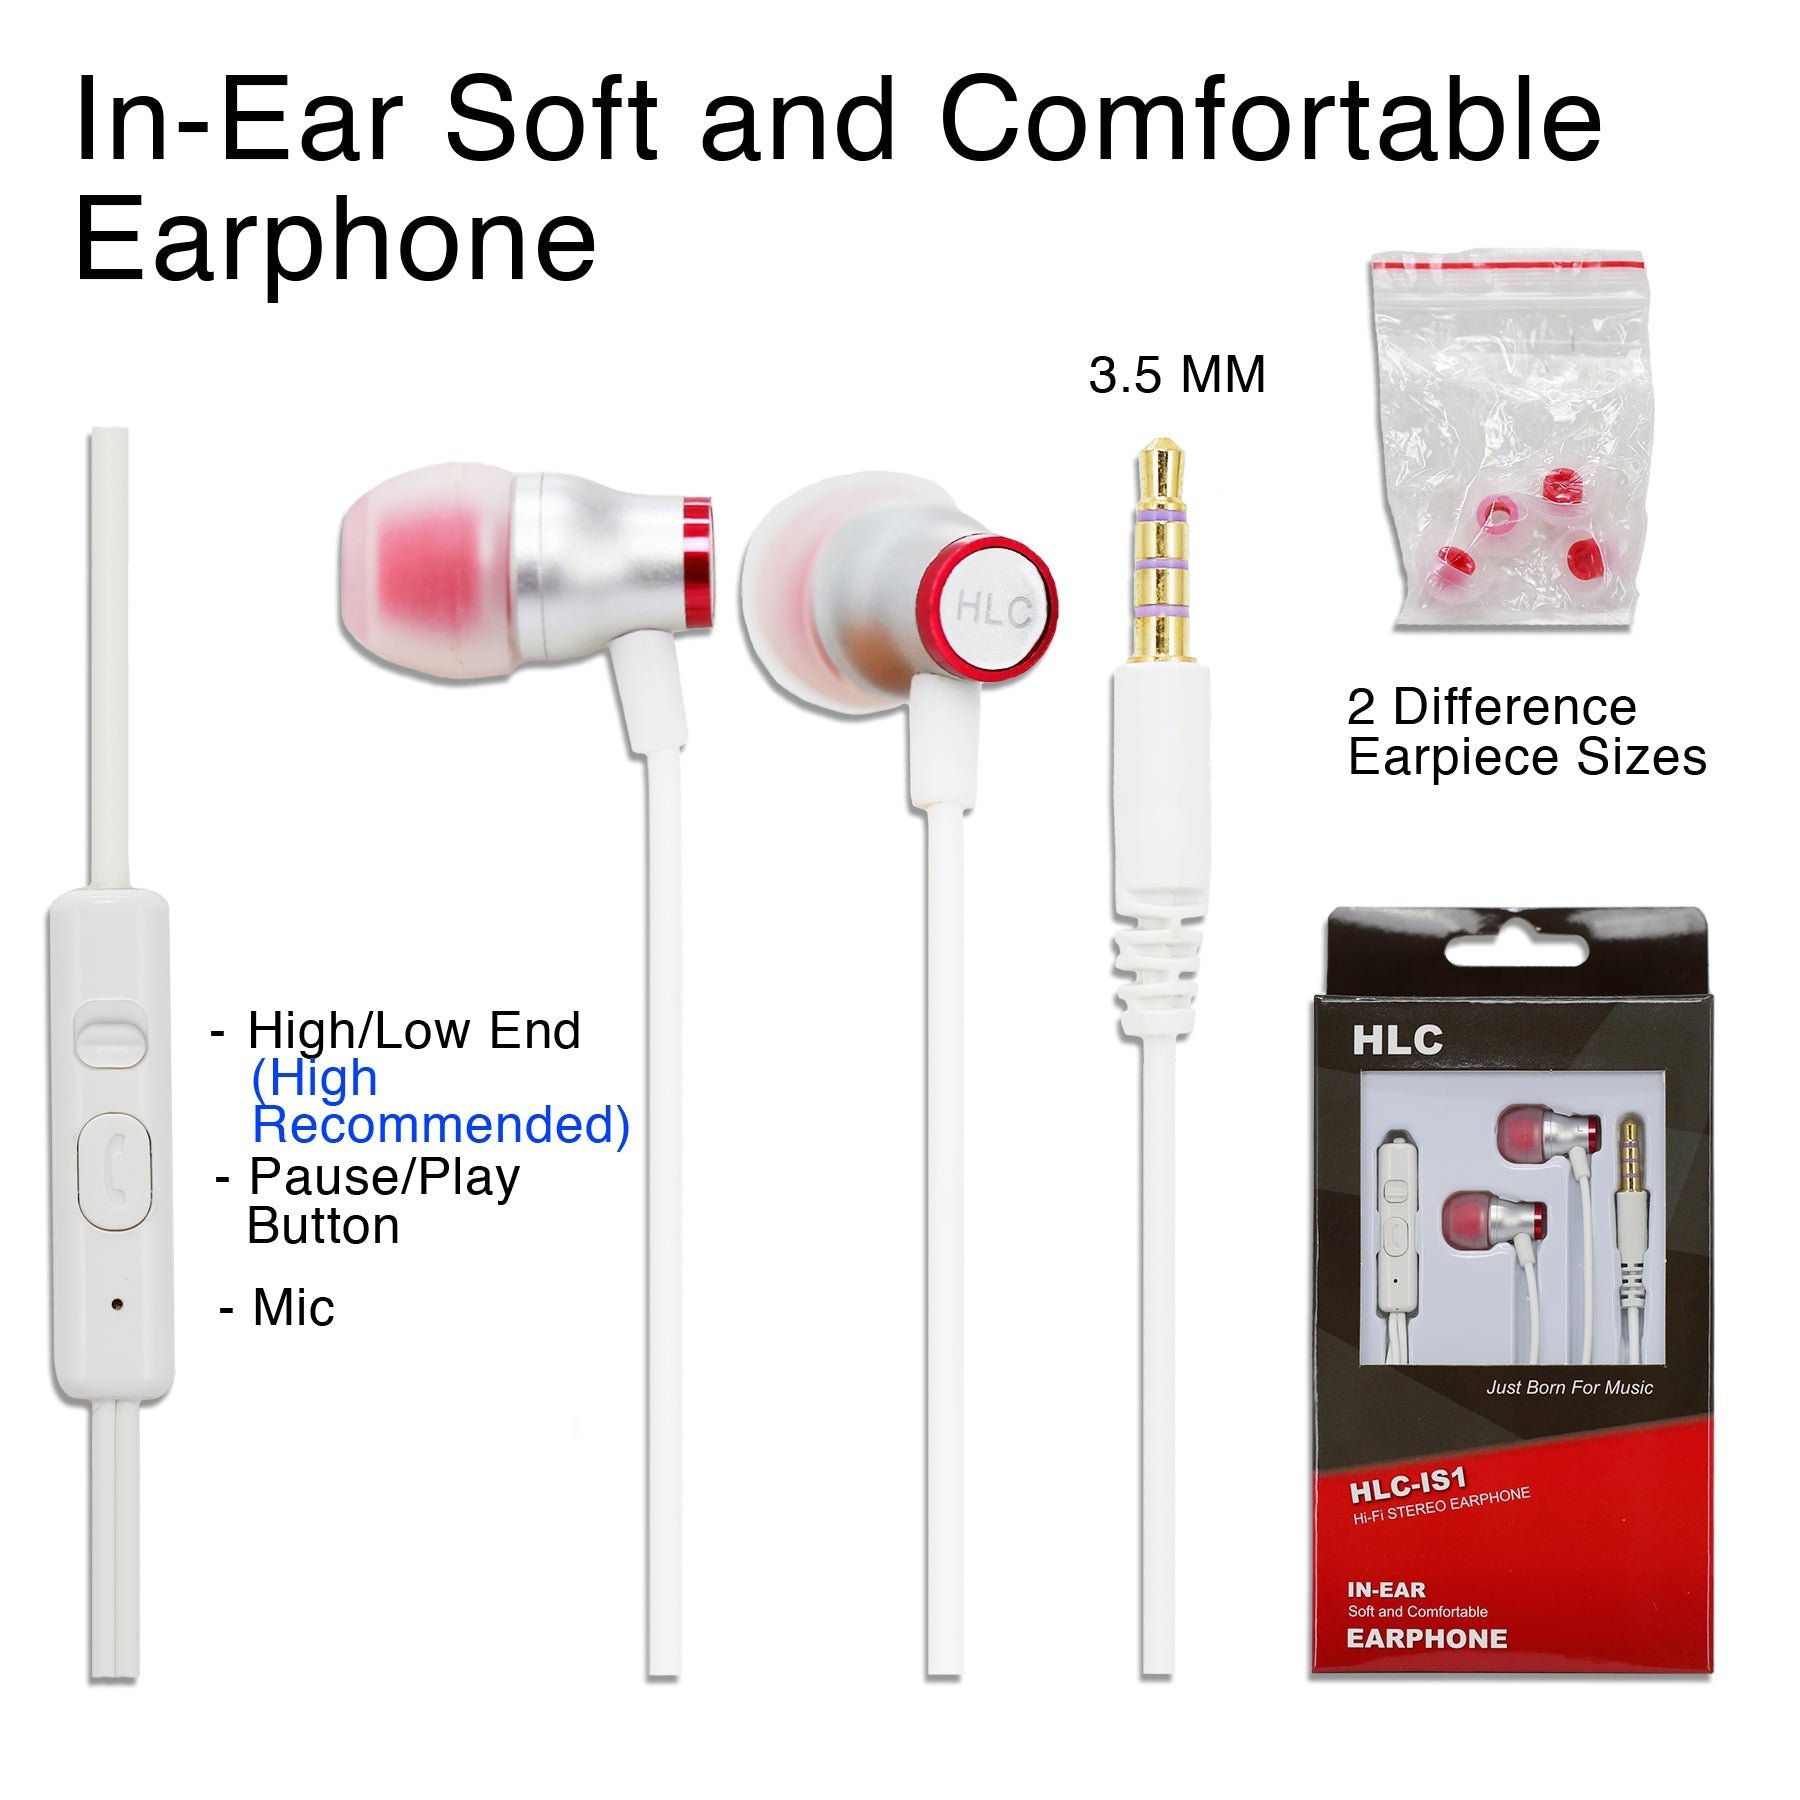 In-Ear Soft and Comfortable Earphone - Silver